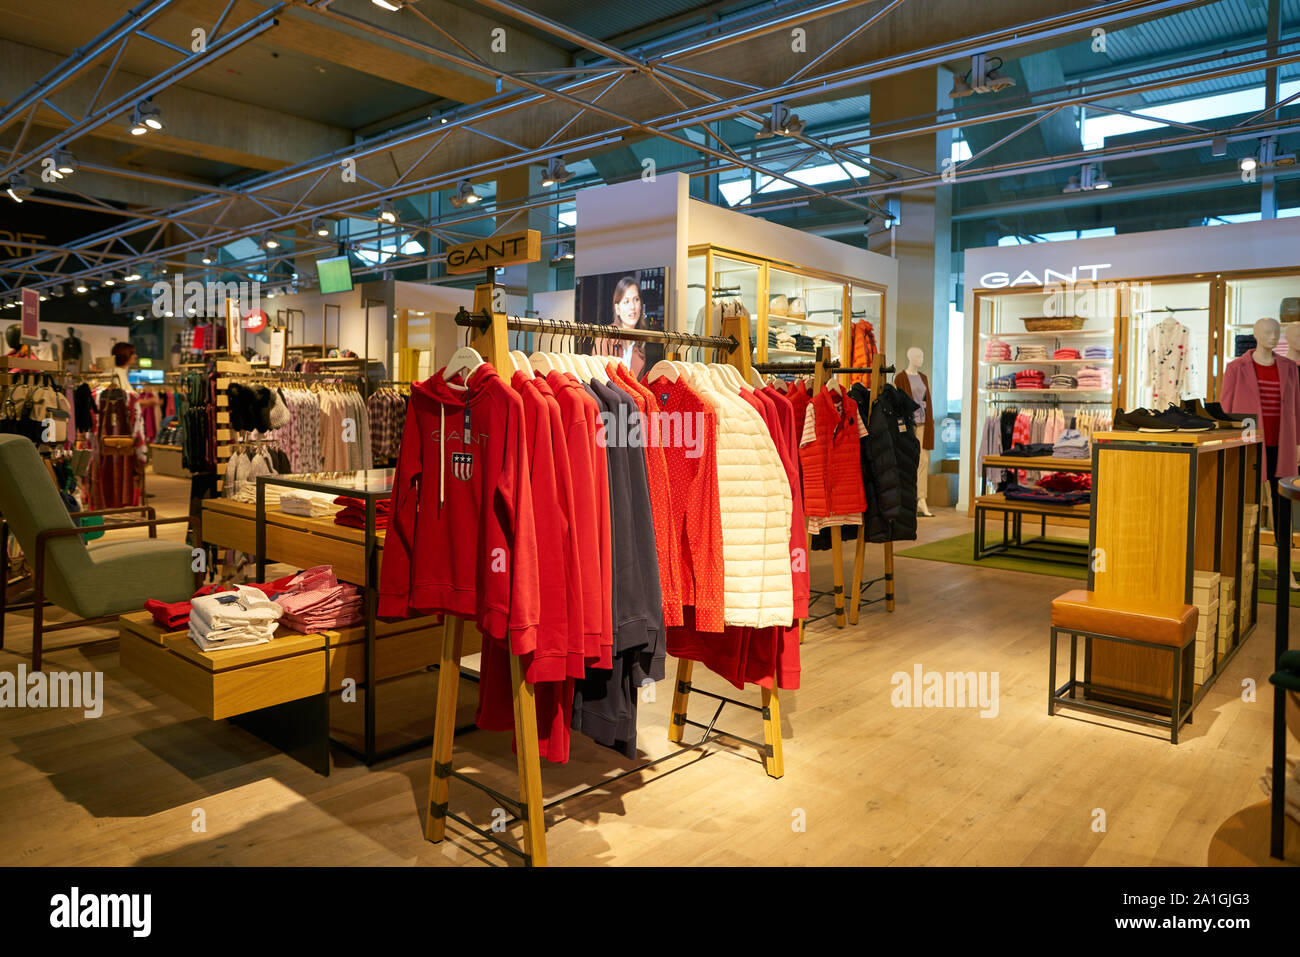 Gant Shopping High Resolution Stock Photography and Images - Alamy